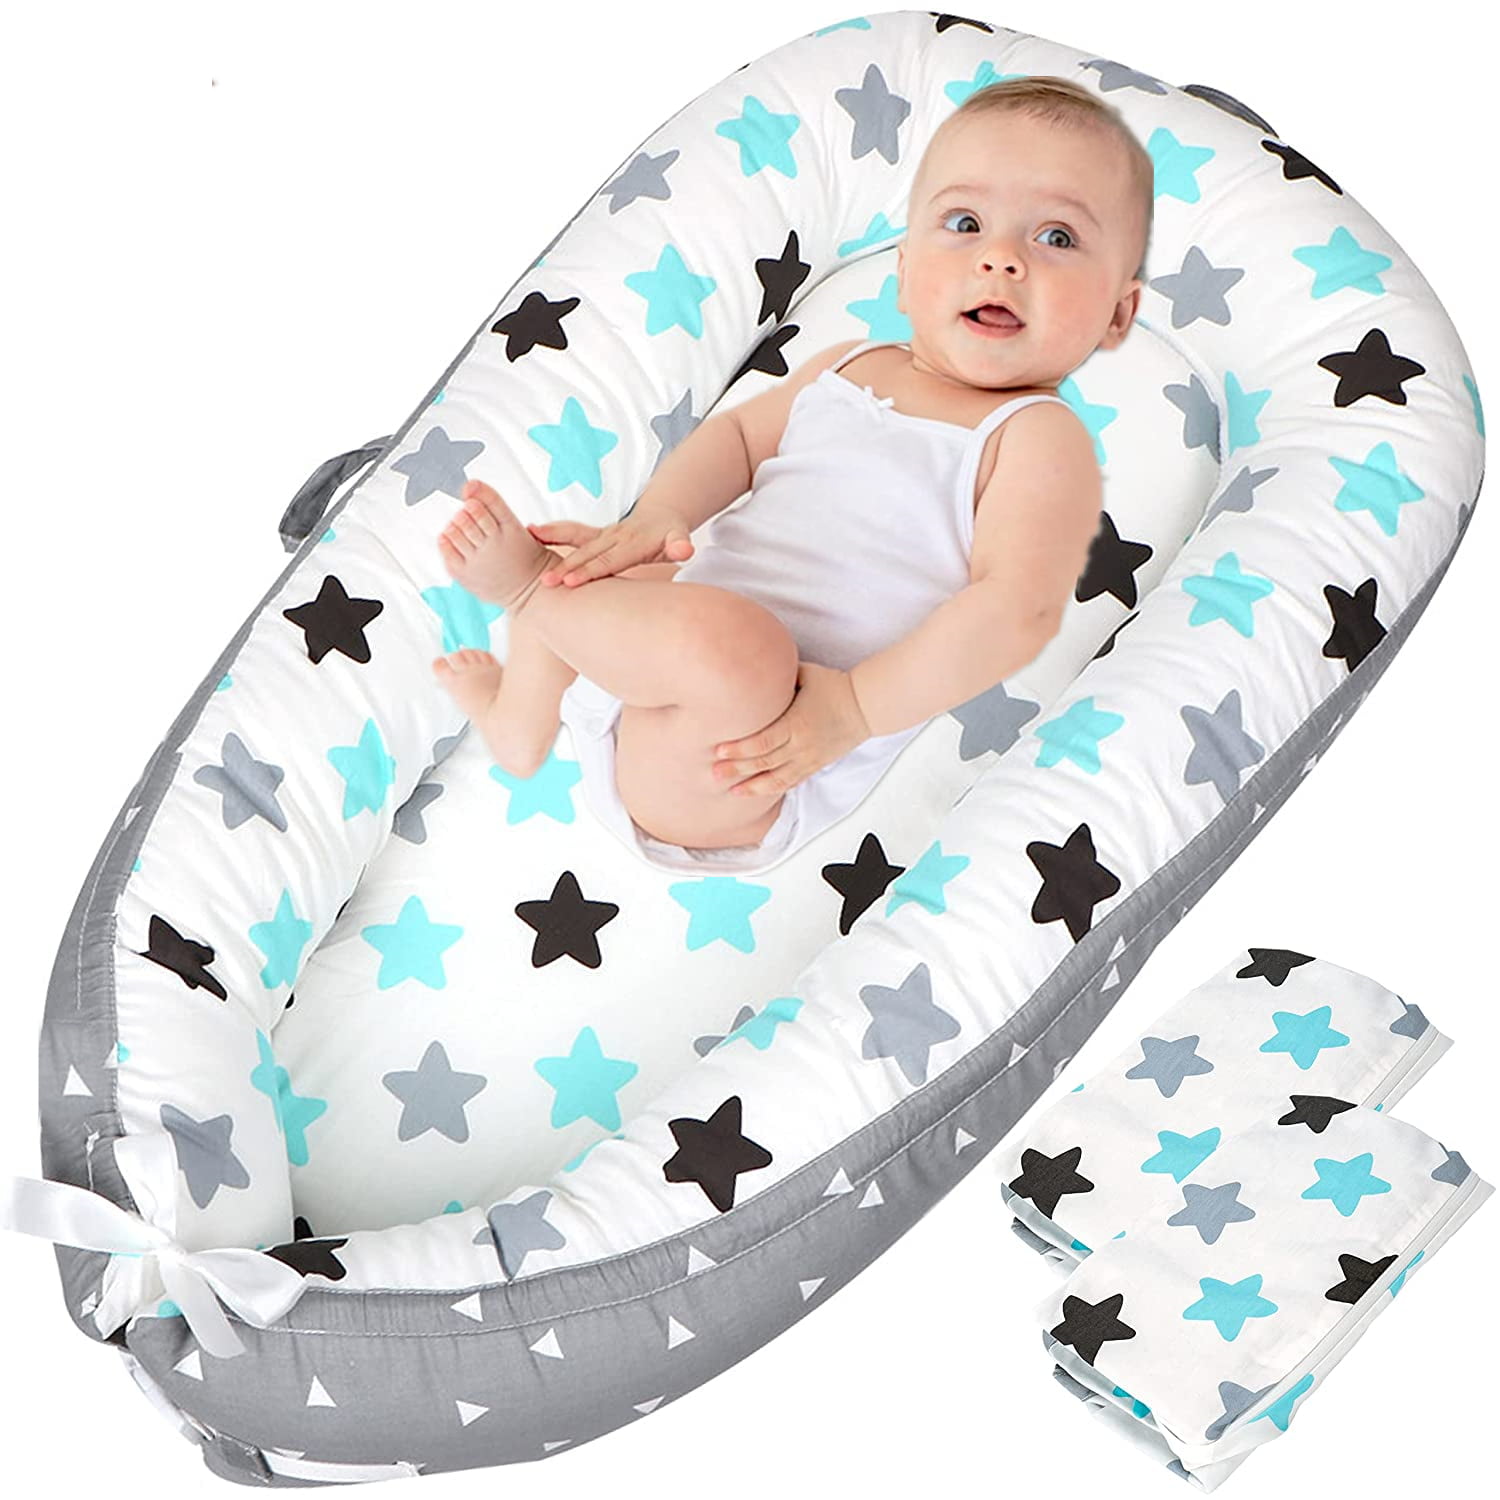 Portable Ultra Soft Breathable Newborn Lounger Crib Reversible Infant Lounger Bed Baby Nest Lounger Co-Sleeping for Baby Shower Gift for 0-12 Months Baby 